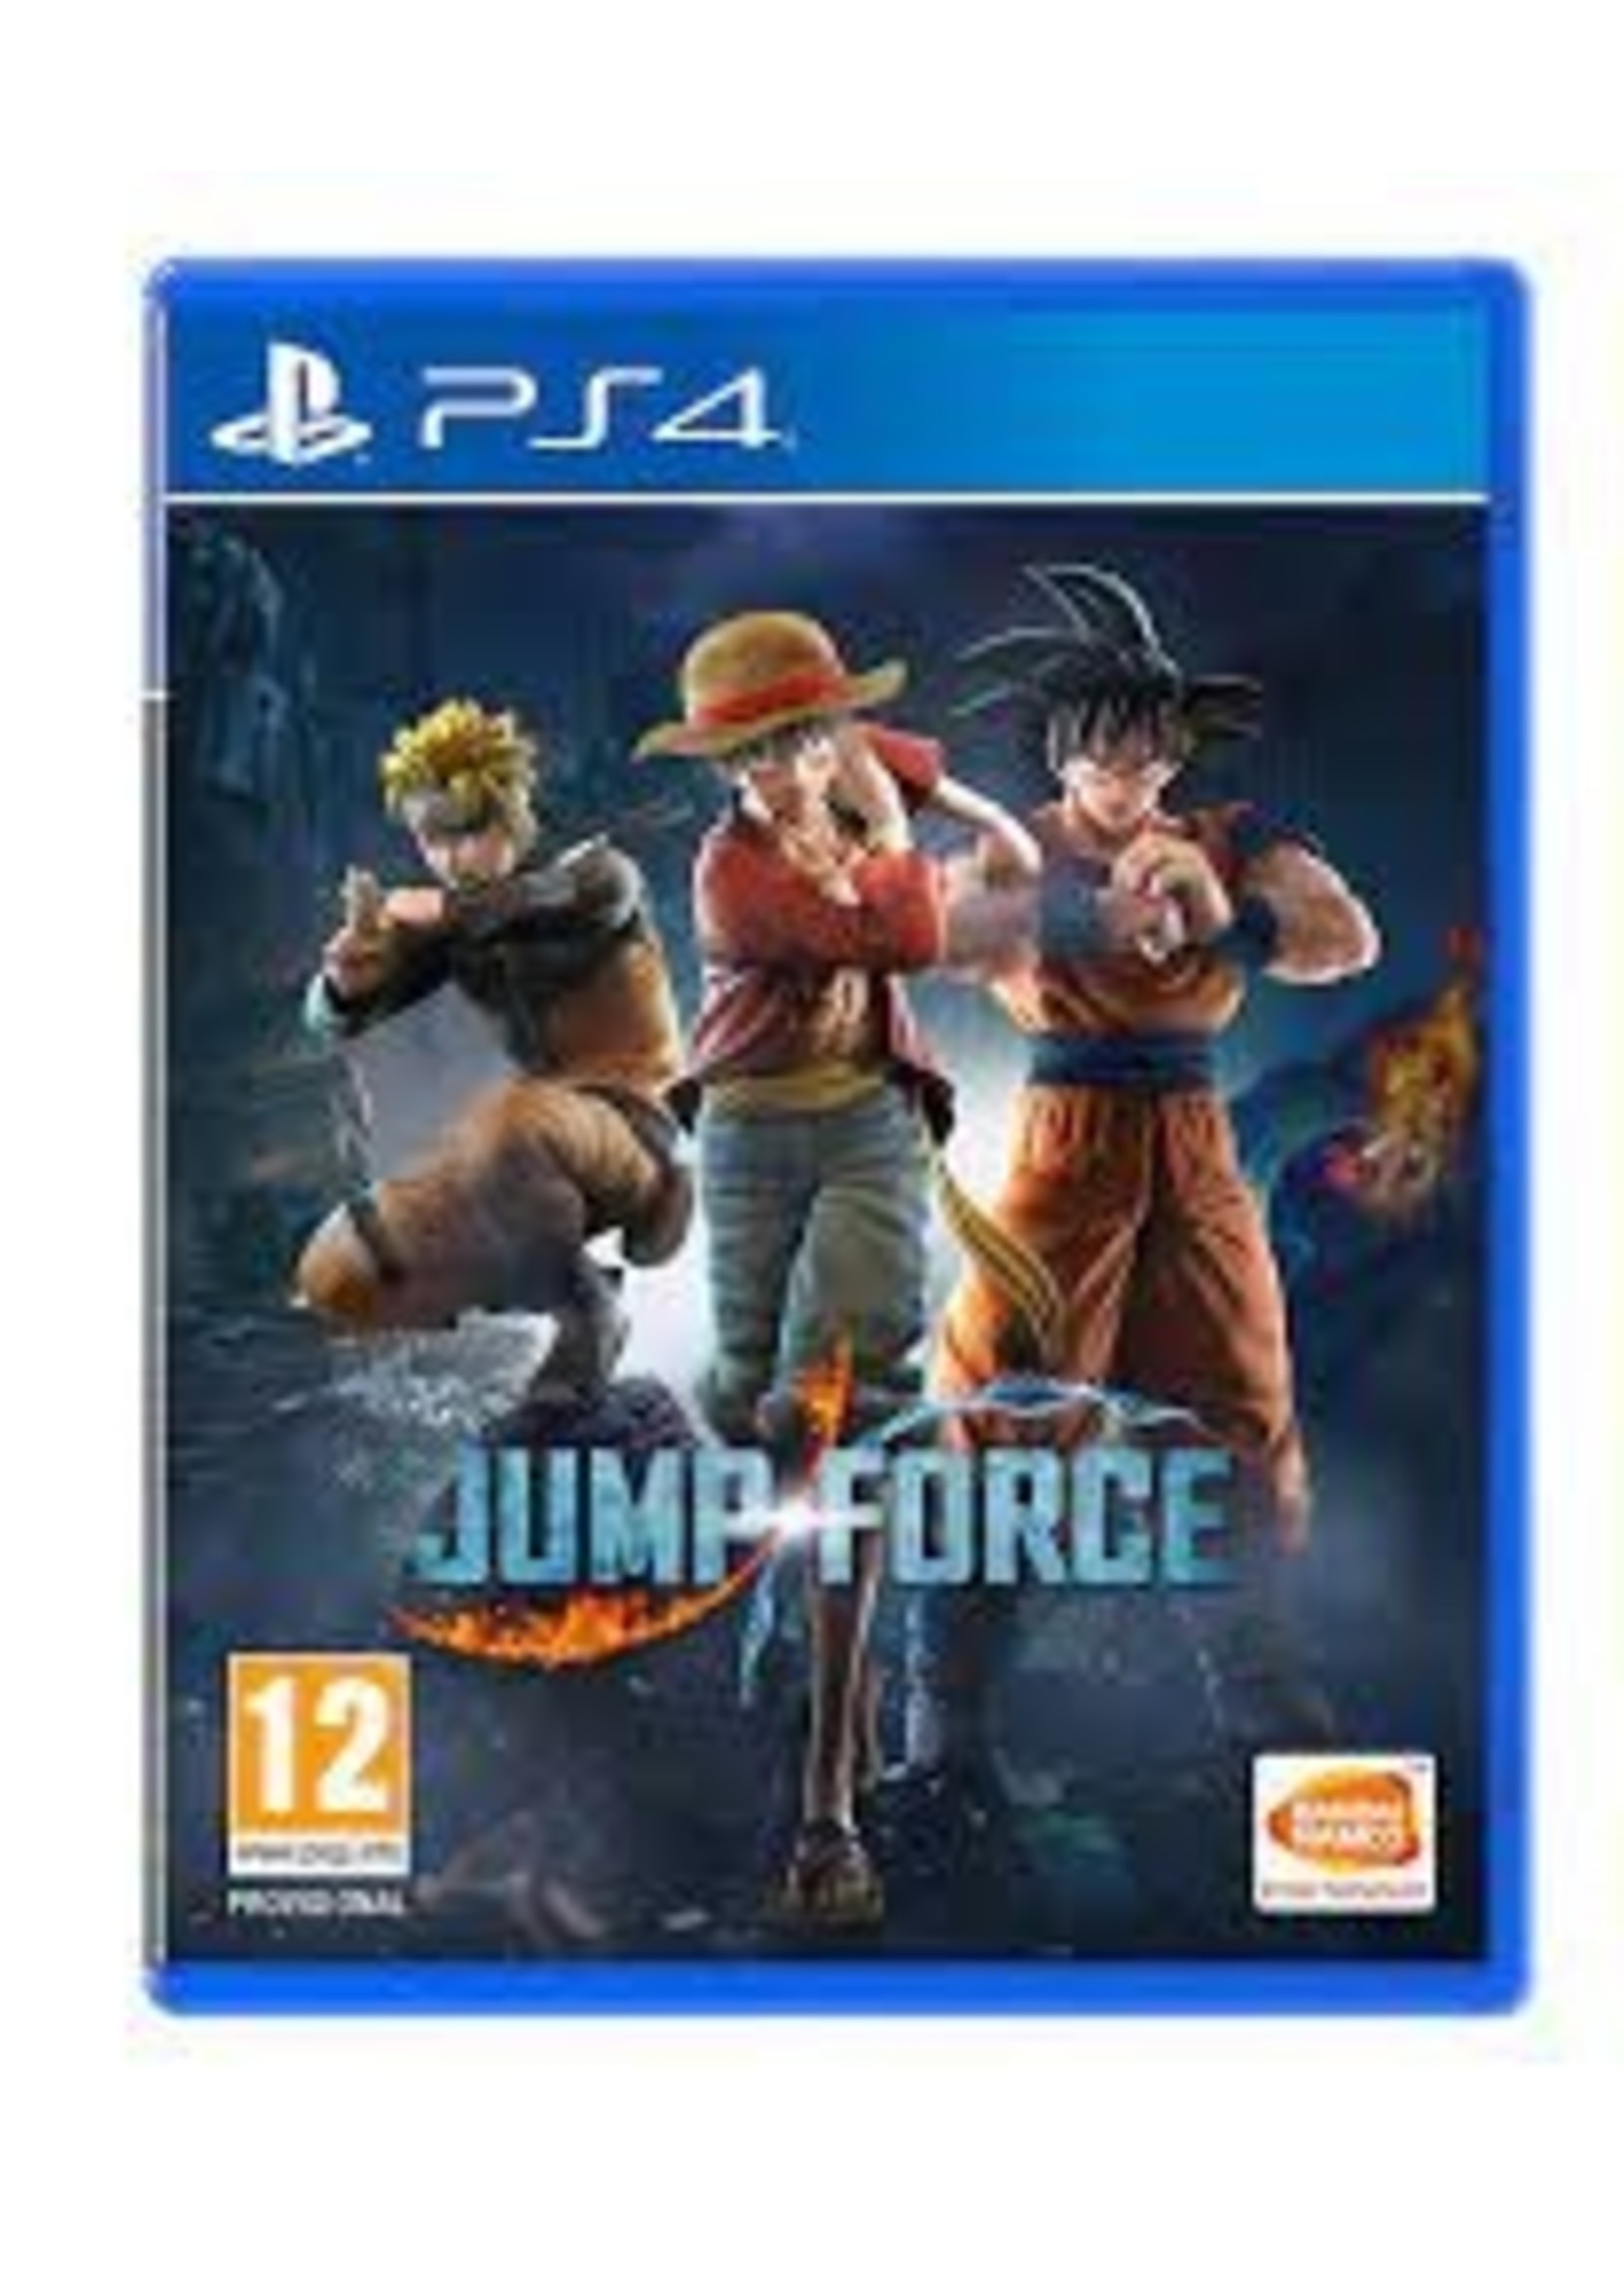 Sony Playstation 4 (PS4) Jump Force